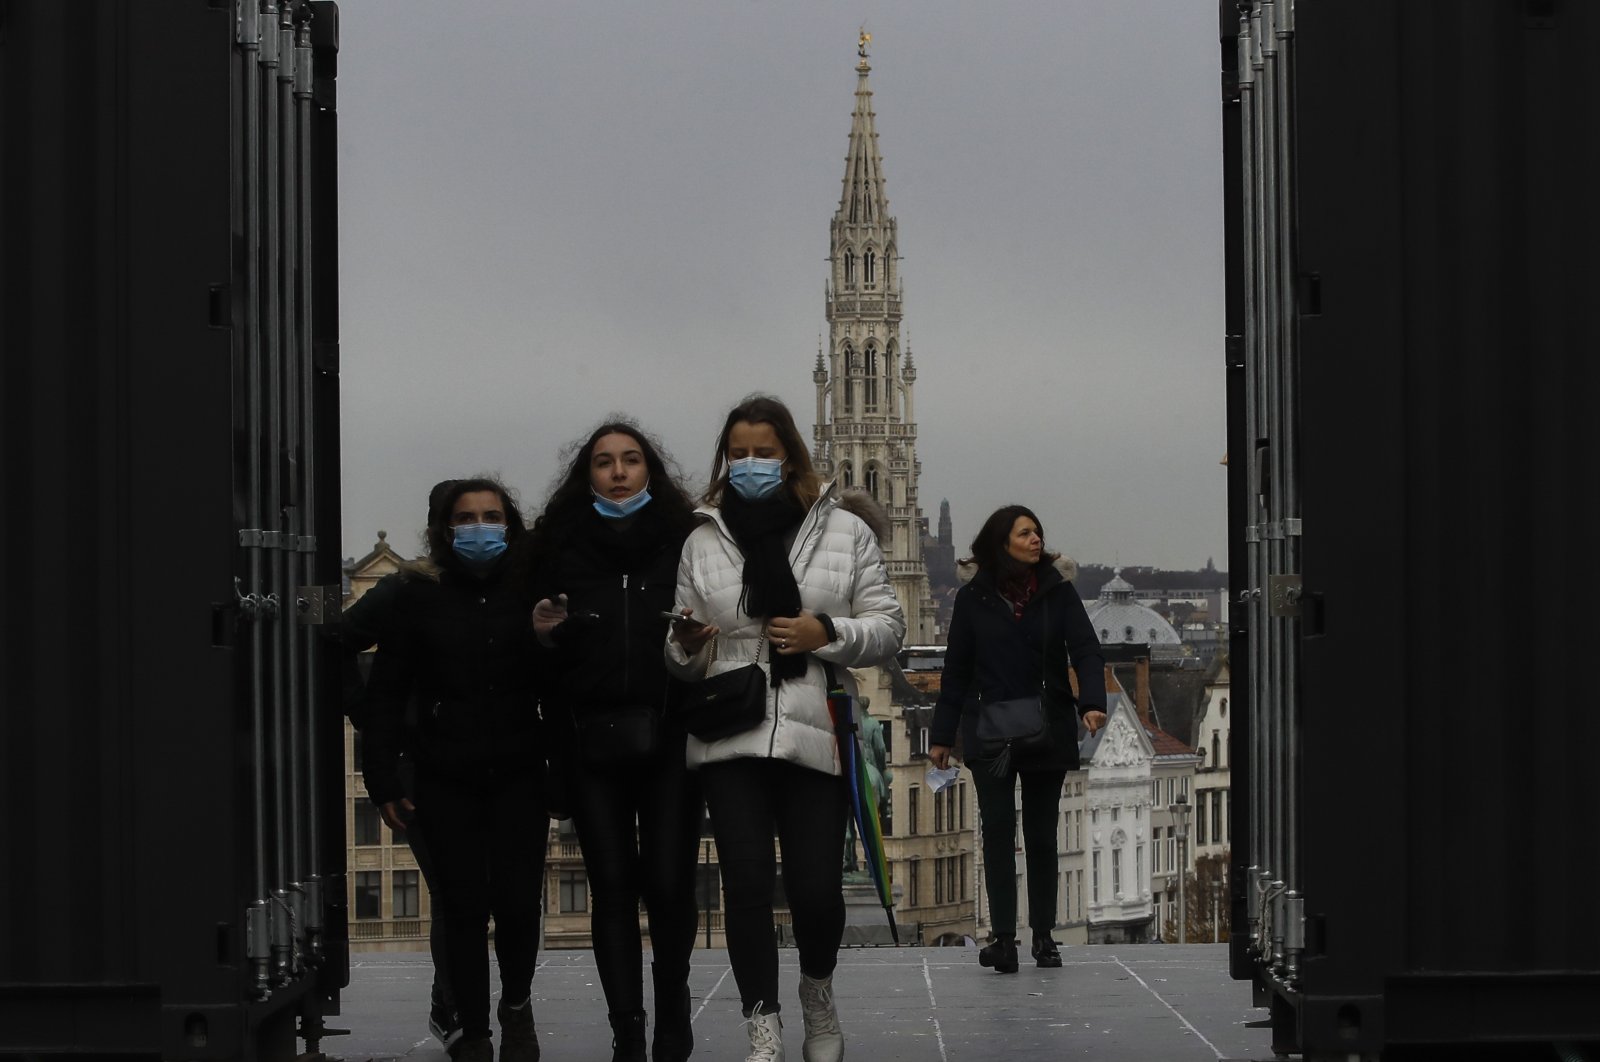 A group of pedestrians, some wearing protective face masks, walk in the city as members of the Belgian government gather to impose new restrictions to curb the spread of the coronavirus pandemic, in Brussels, Belgium, Nov. 16, 2021. (EPA Photo)